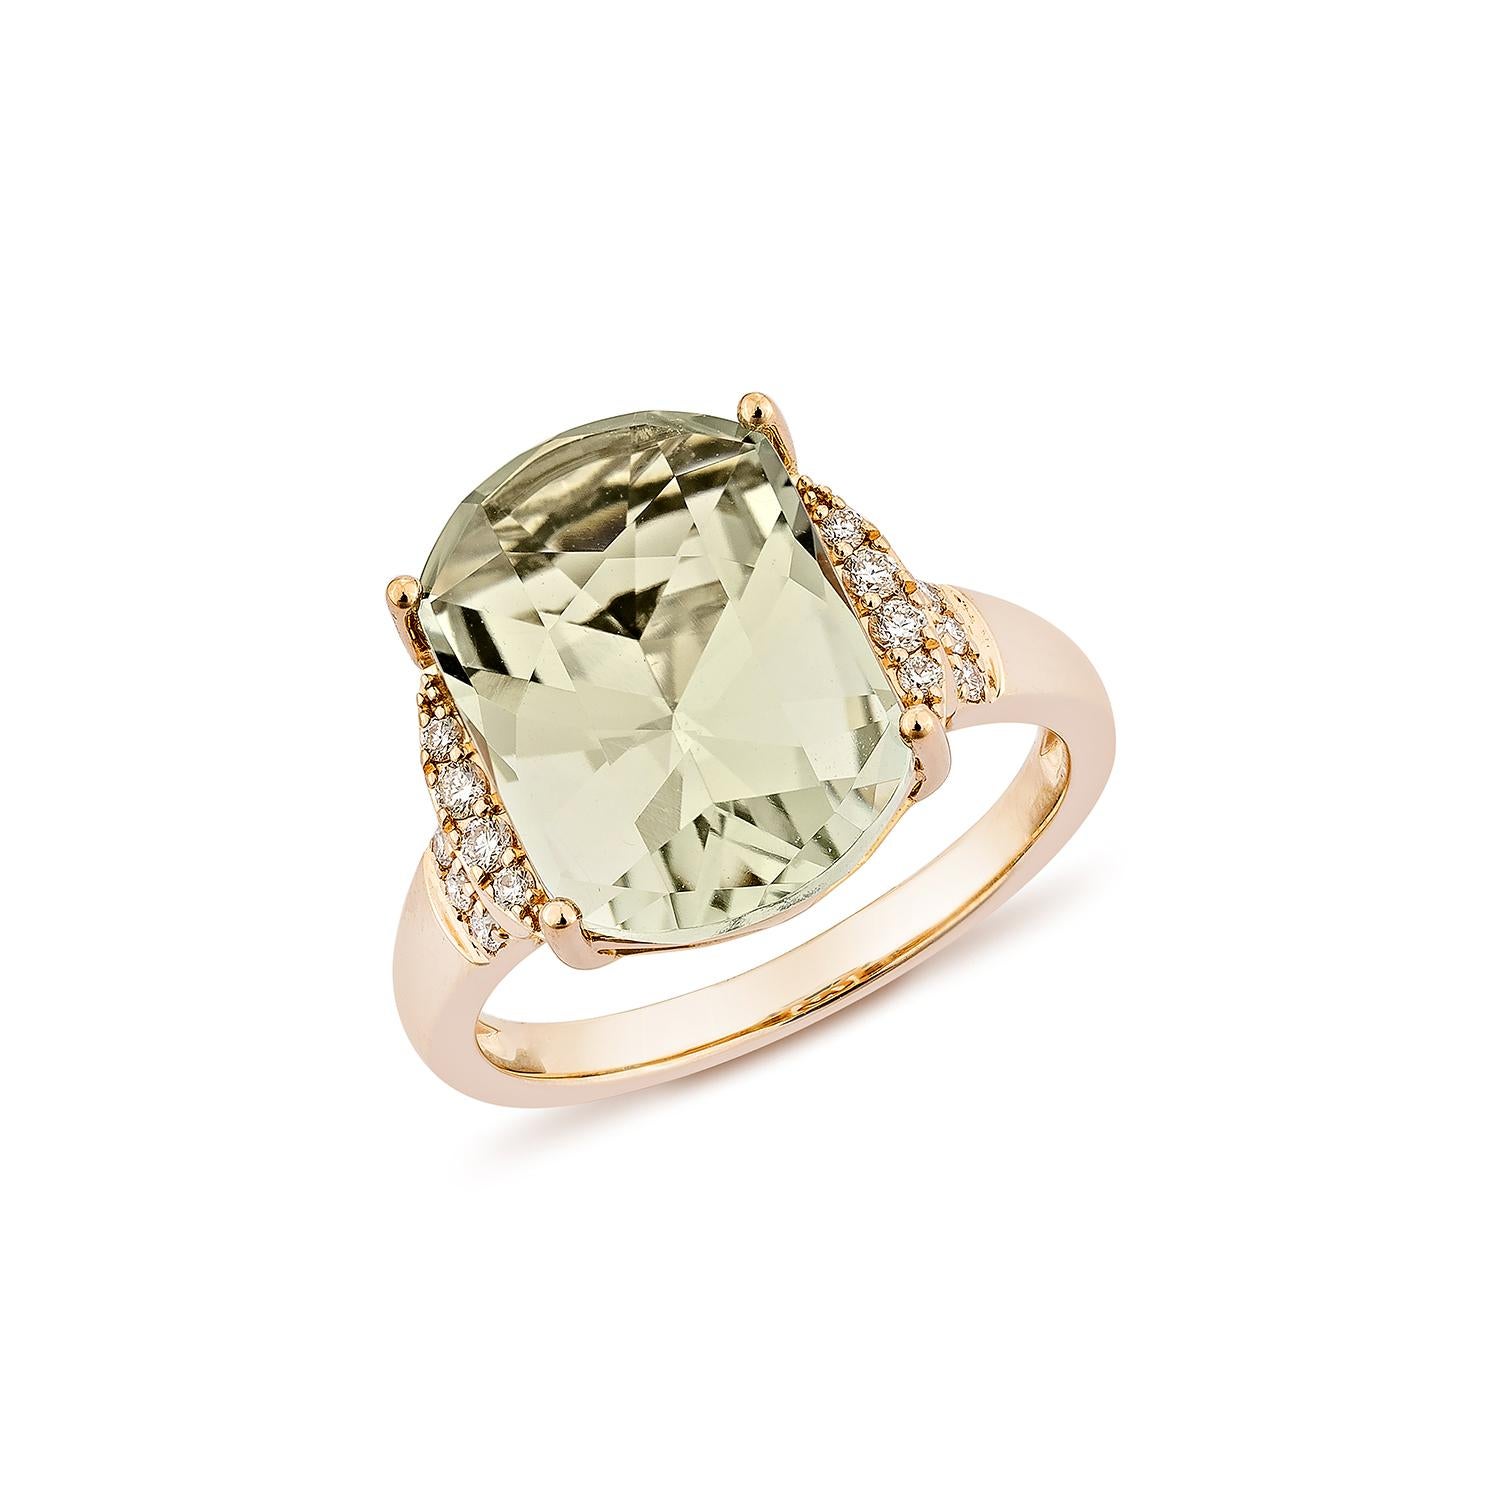 Contemporary 5.98 Carat Green Amethyst Fancy Ring in 18Karat Yellow Gold with Diamond. For Sale